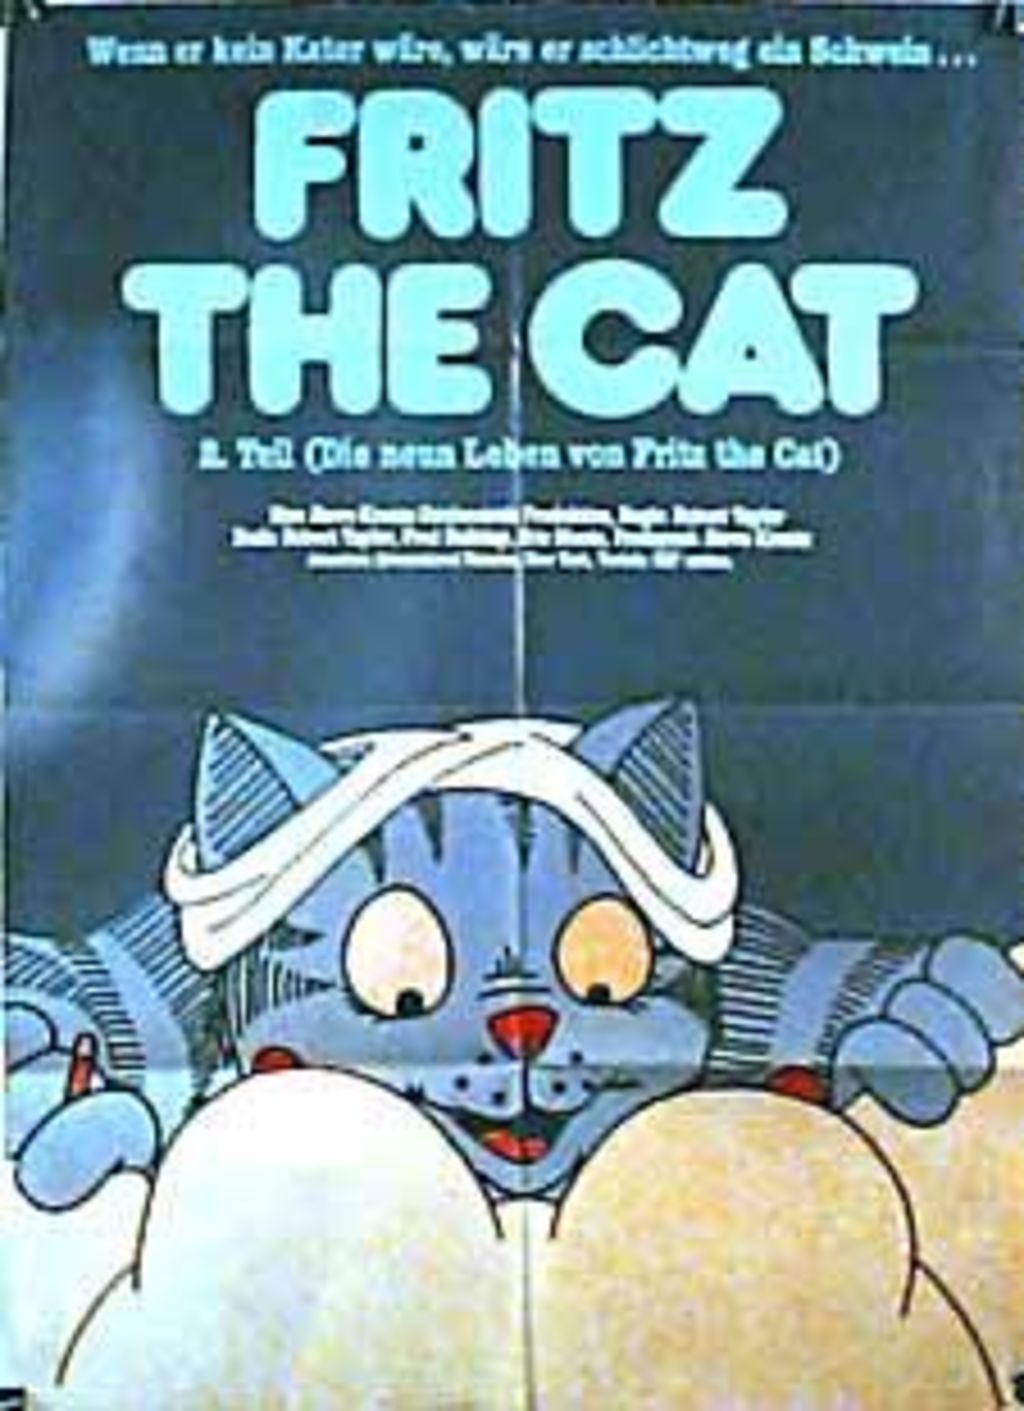 Watch The Nine Lives of Fritz the Cat on Netflix Today! | NetflixMovies.com